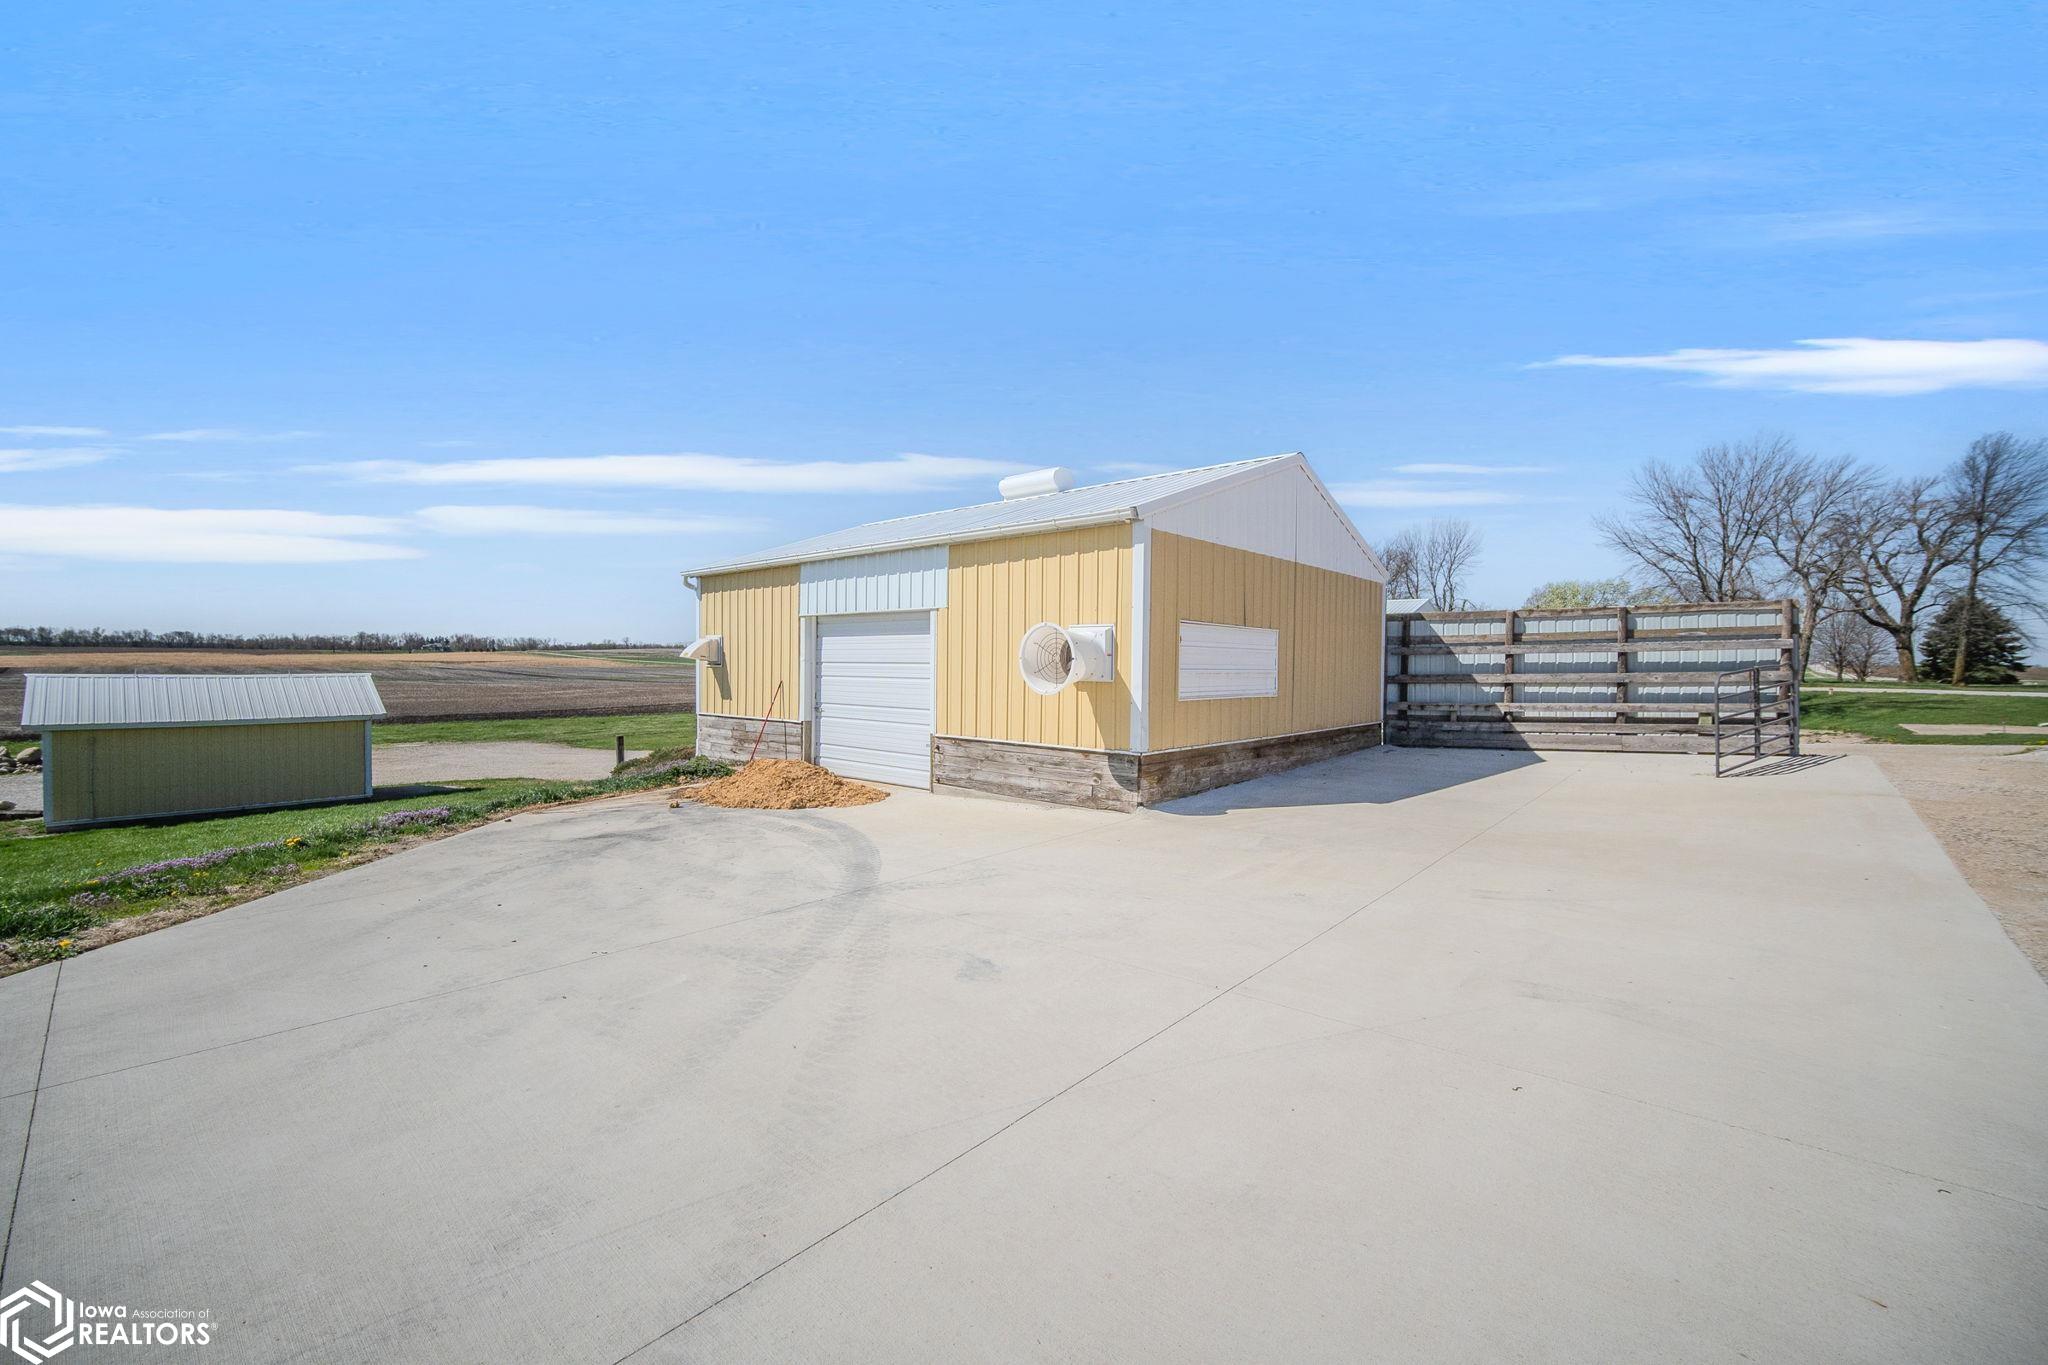 62128 315th, Maxwell, Iowa 50161, 3 Bedrooms Bedrooms, ,2 BathroomsBathrooms,Single Family,For Sale,315th,6316254